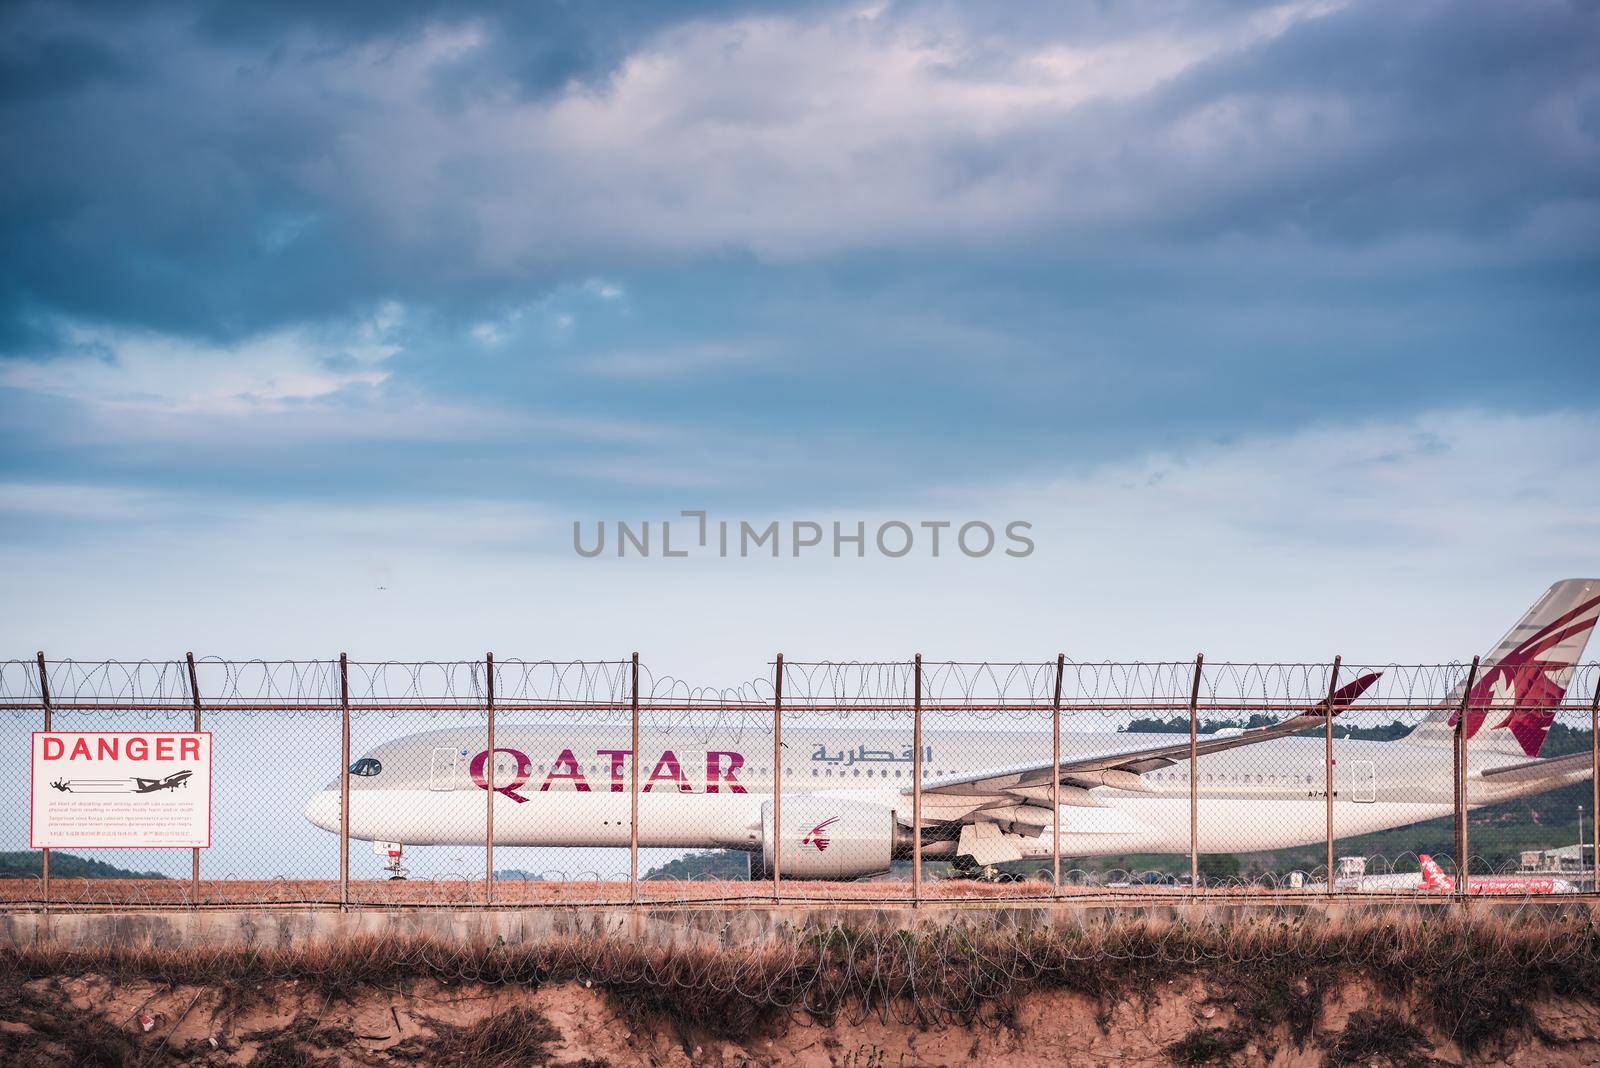 Phuket, Thailand - Feb 20, 2020: Qatar Airways Boeing 777 Airplane on Runway Track Preparation for Take-Off at Phuket International Airport. Business Transportation and Aviation Commercial Airliner